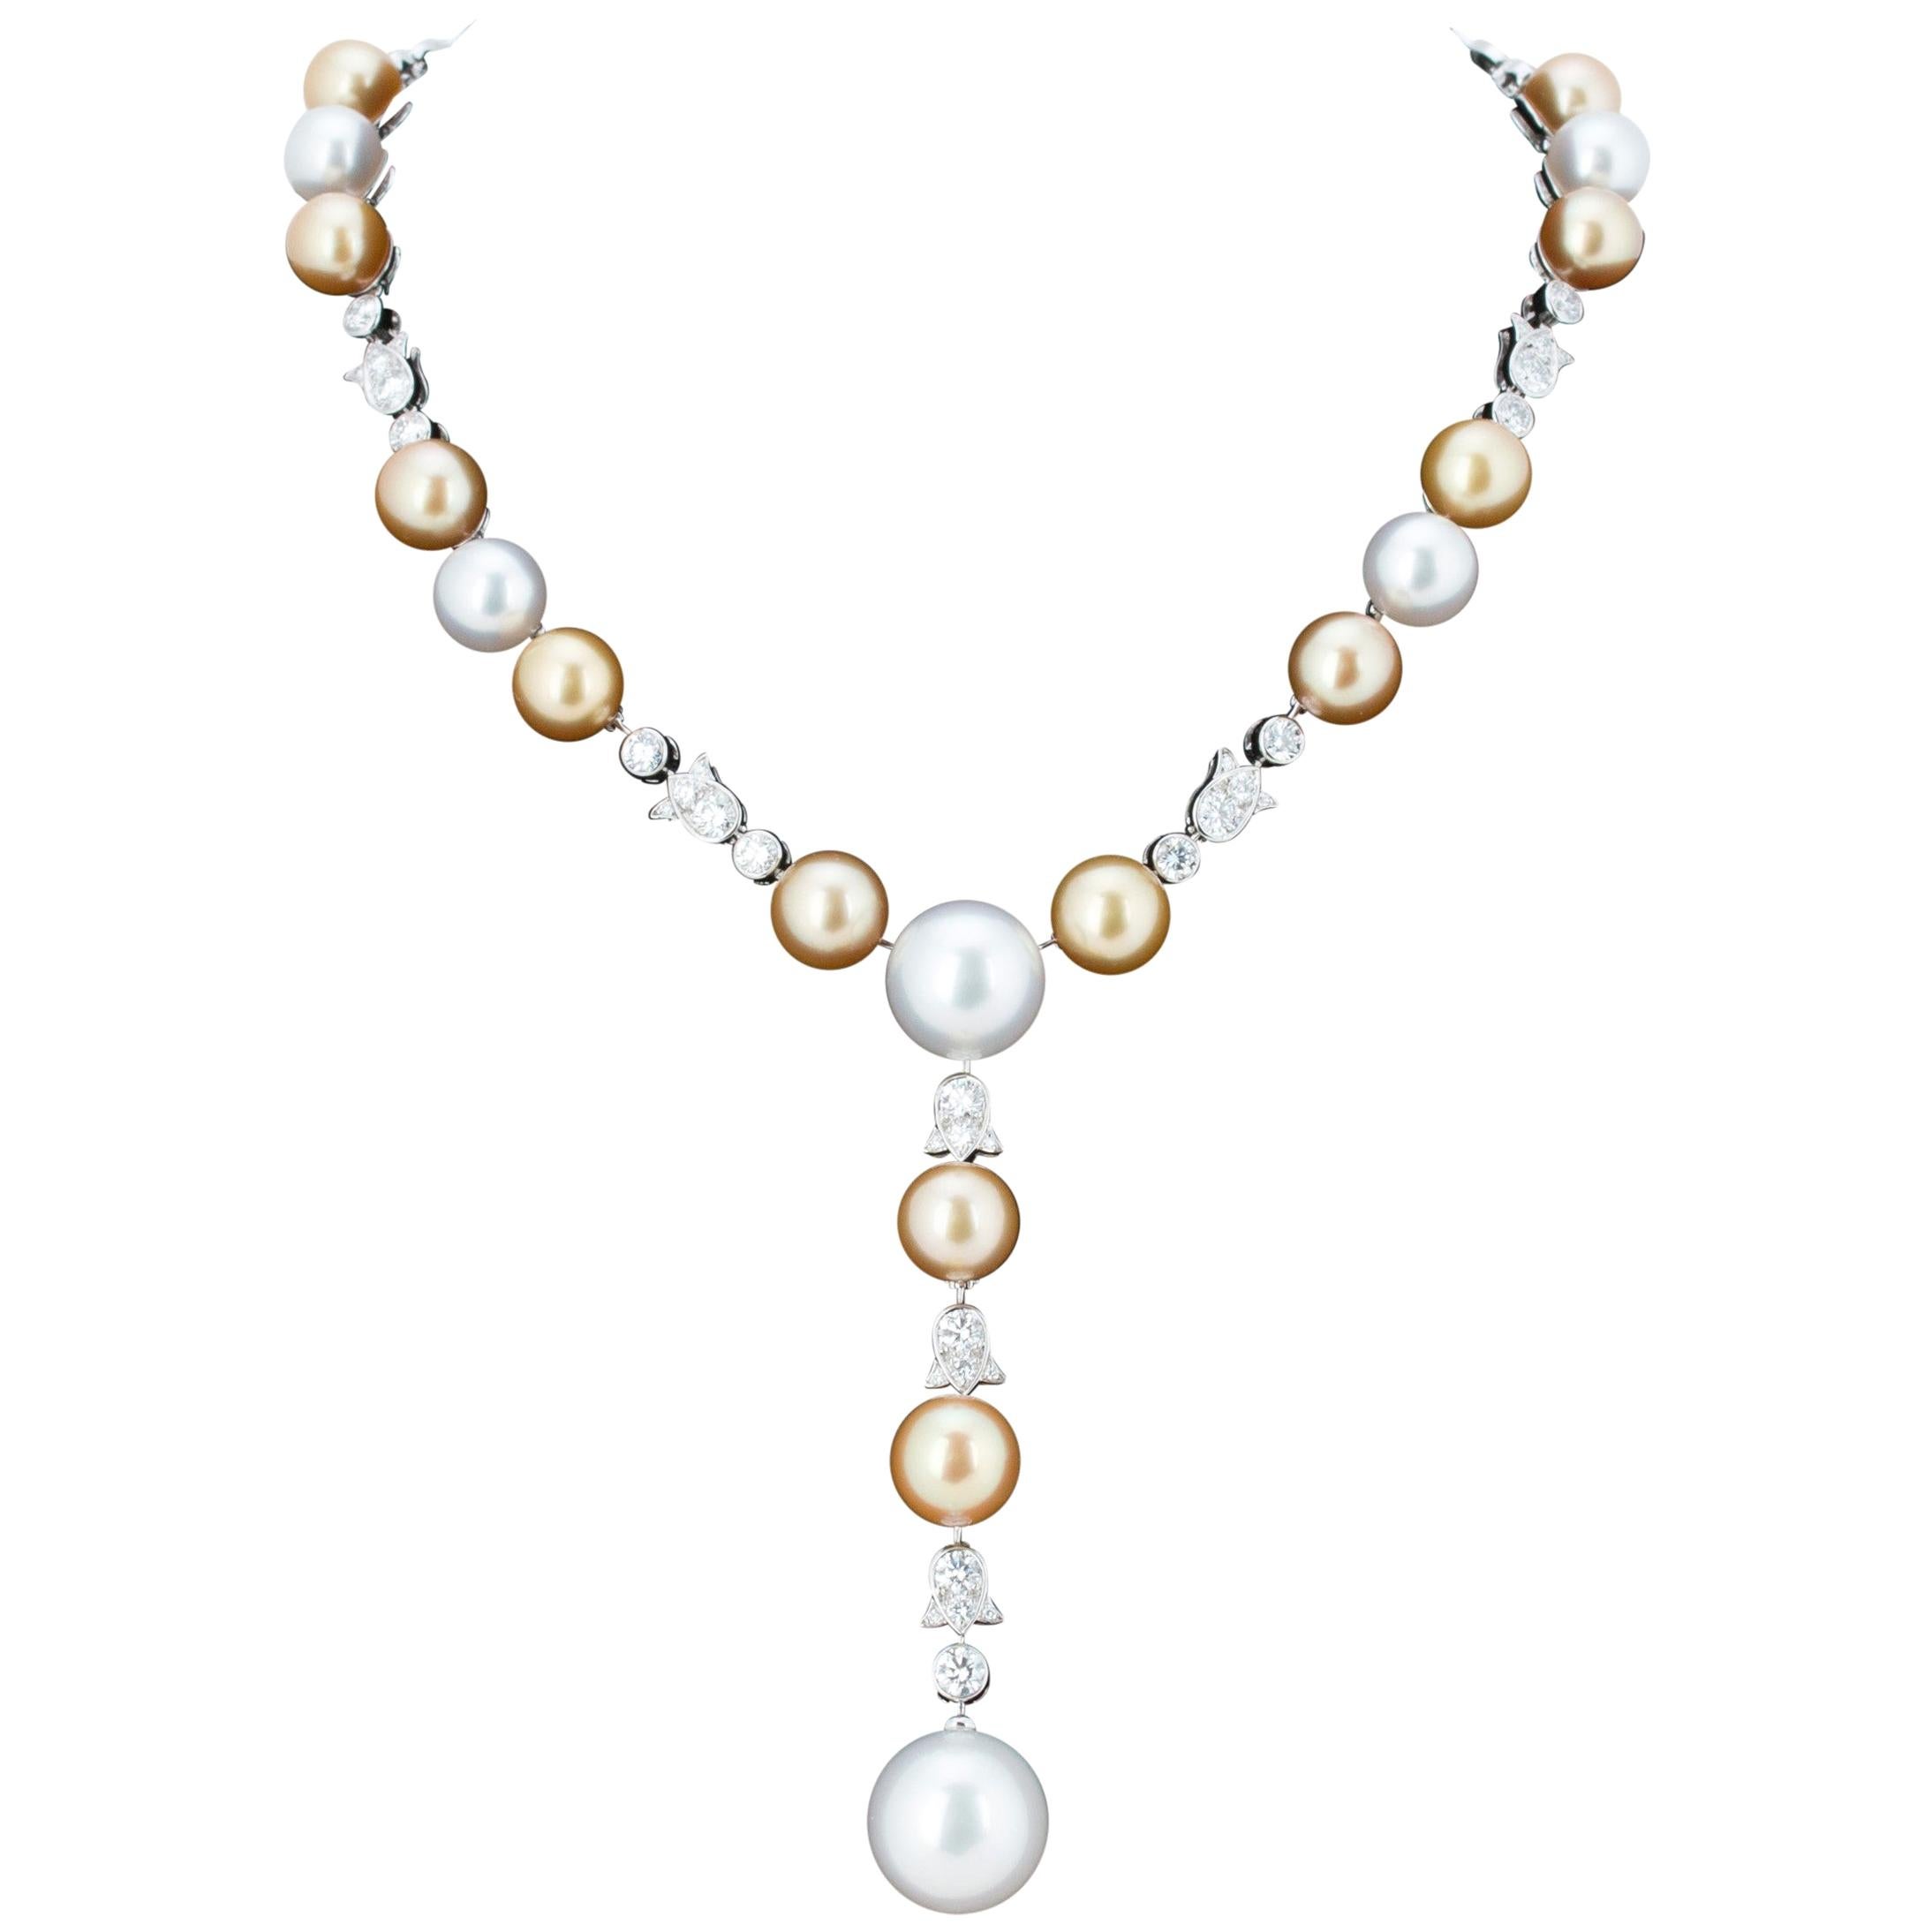 cartier pearl necklace price